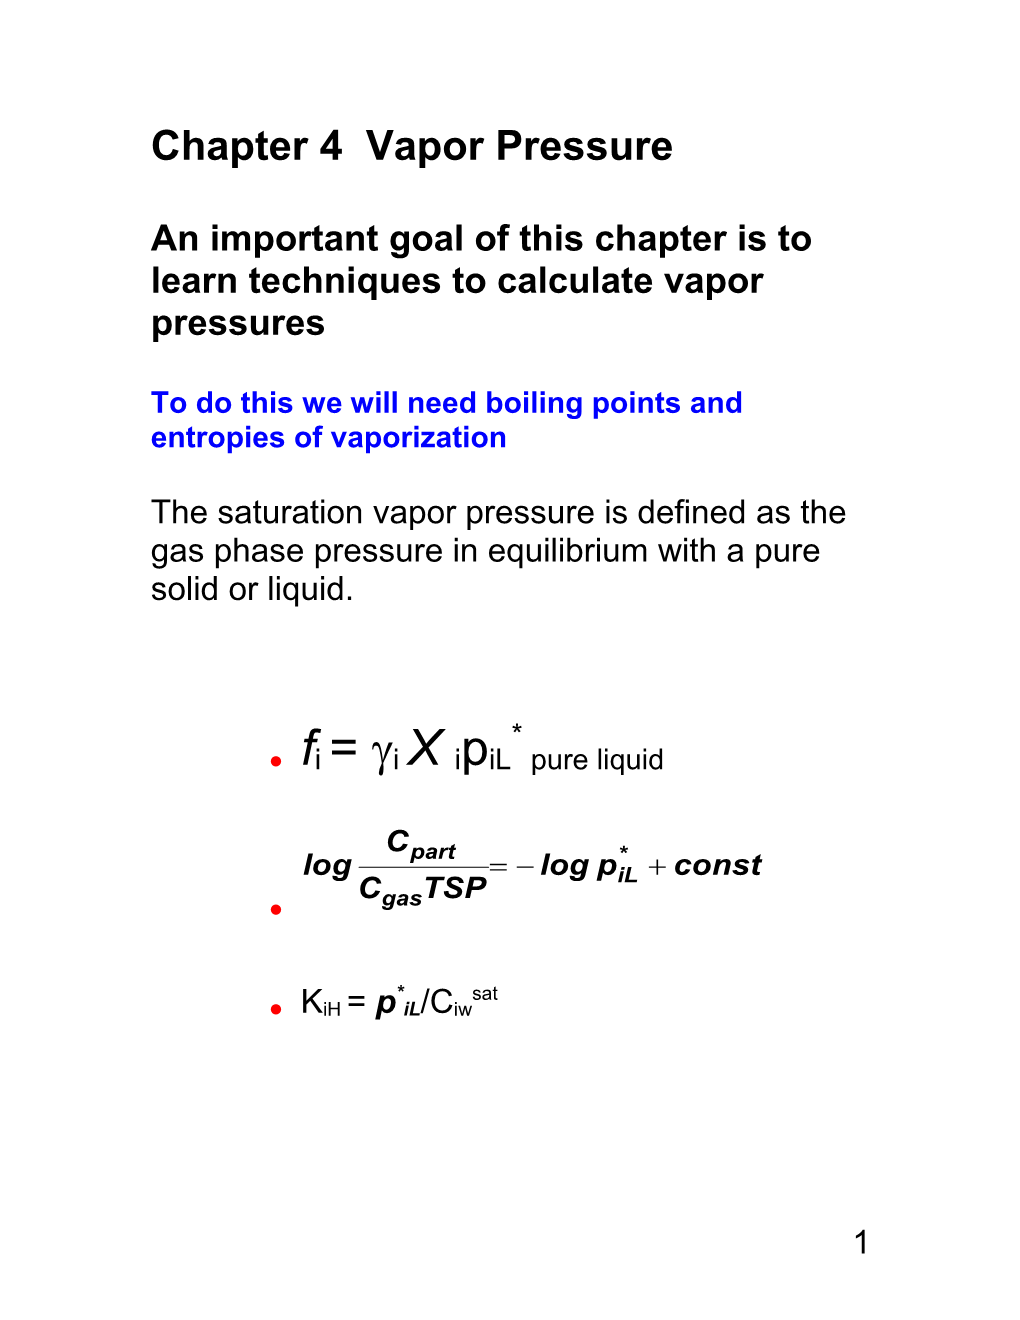 An Important Goal of This Chapter Is to Learn Techniques to Calculate Vapor Pressures s1